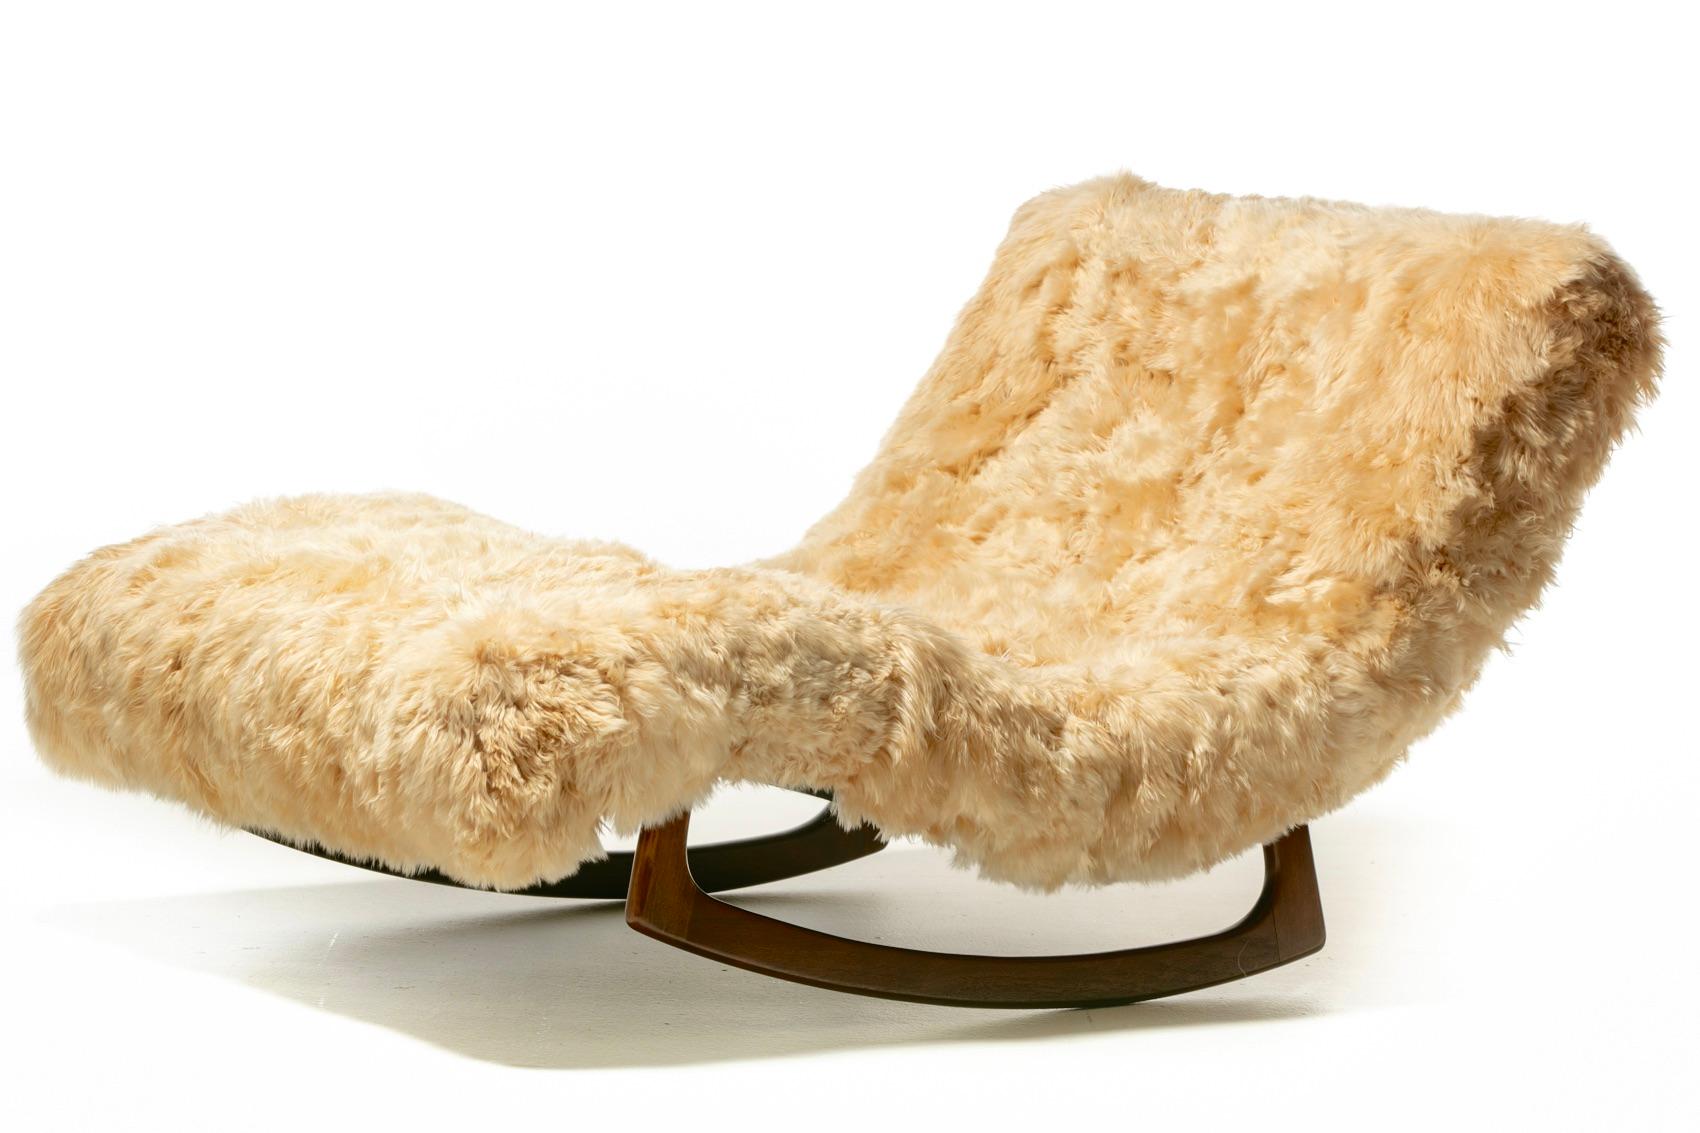 Hide Adrian Pearsall Chaise Lounge Rocker Newly Upholstered in Soft Peruvian Alpaca For Sale